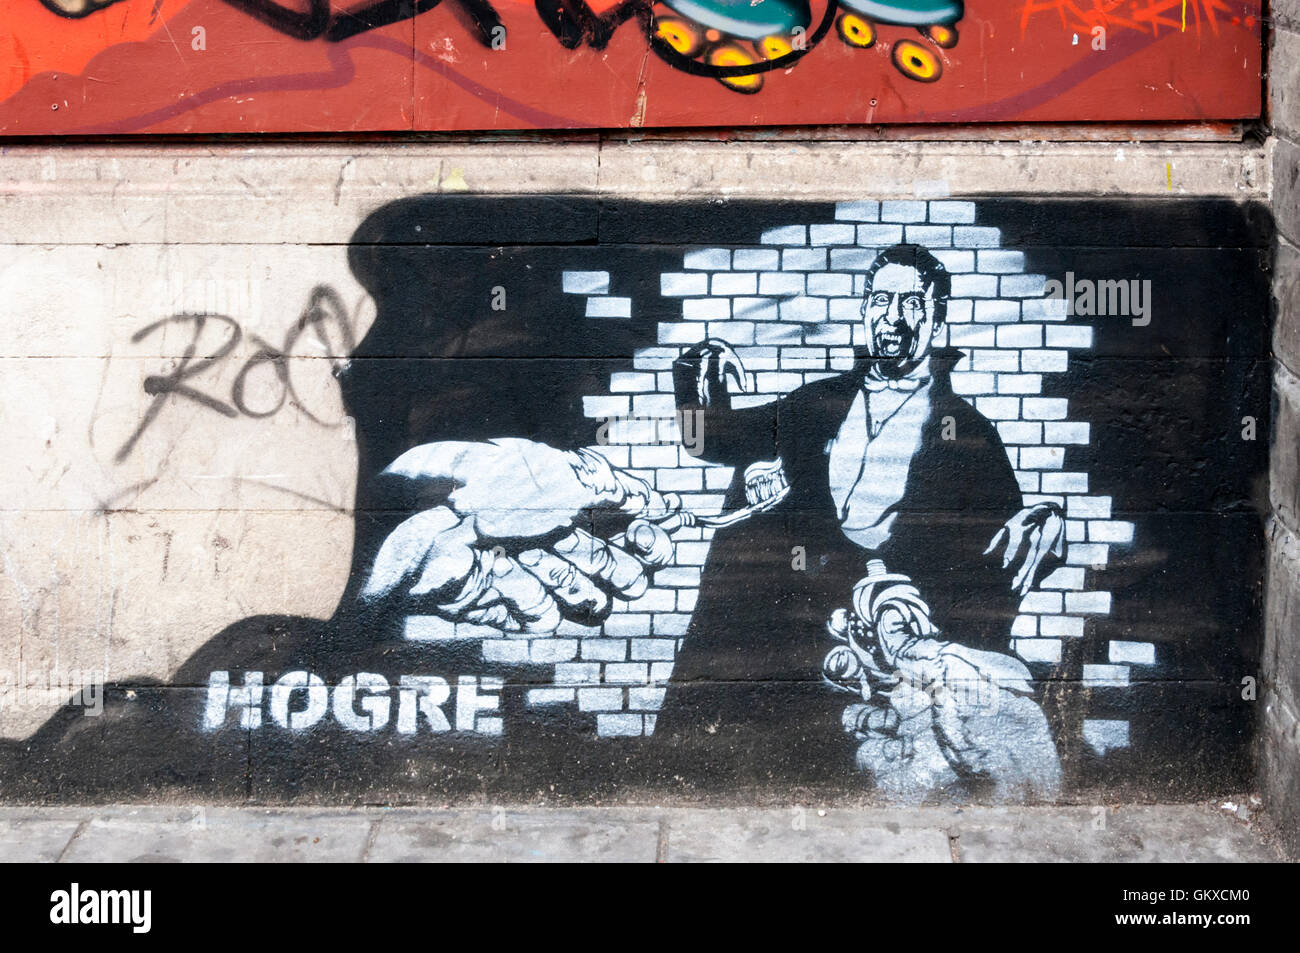 Graffiti by Hogre in Stokes Croft area of Bristol shows a vampire, possibly Dracula, being offered toothpaste & a toothbrush. Stock Photo